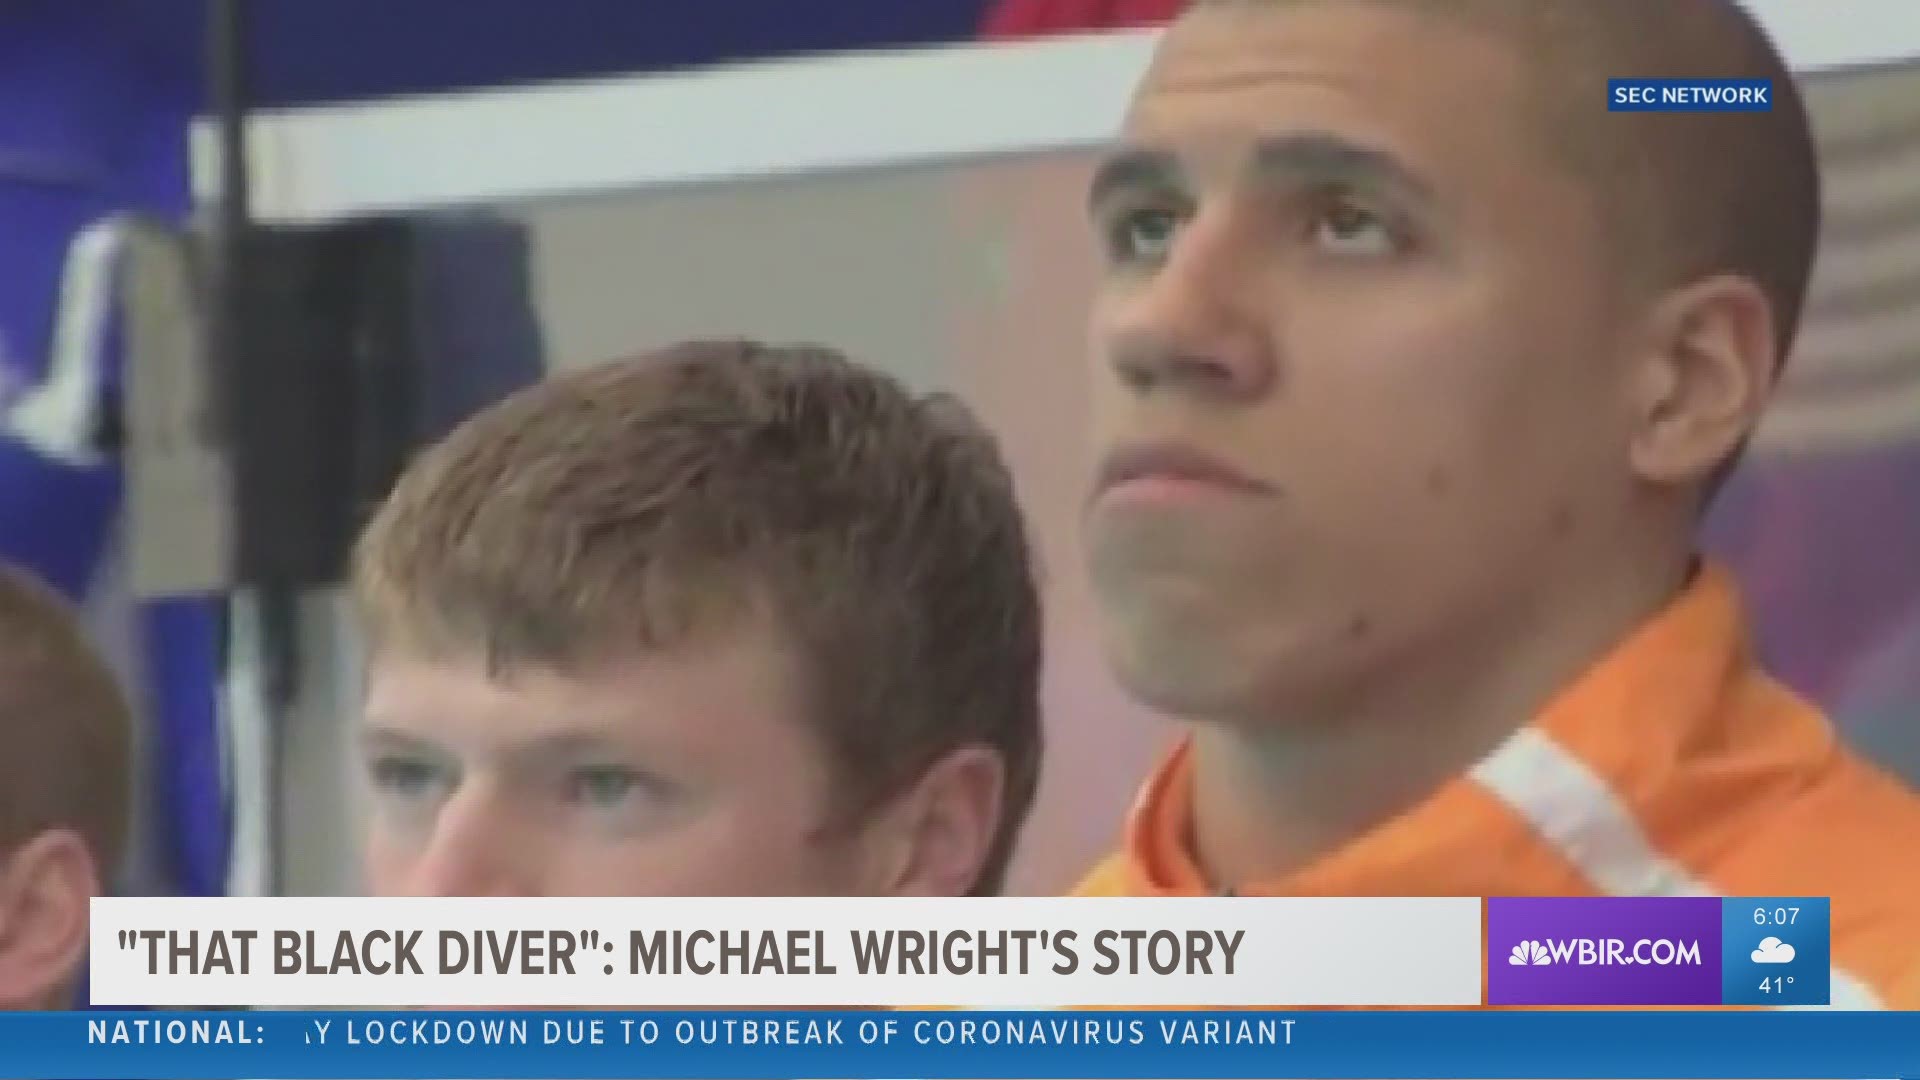 Former Tennessee diver Michael Wright is the first Black person to win the USA Diving national championship. Today, he reflects on that time and what it means.